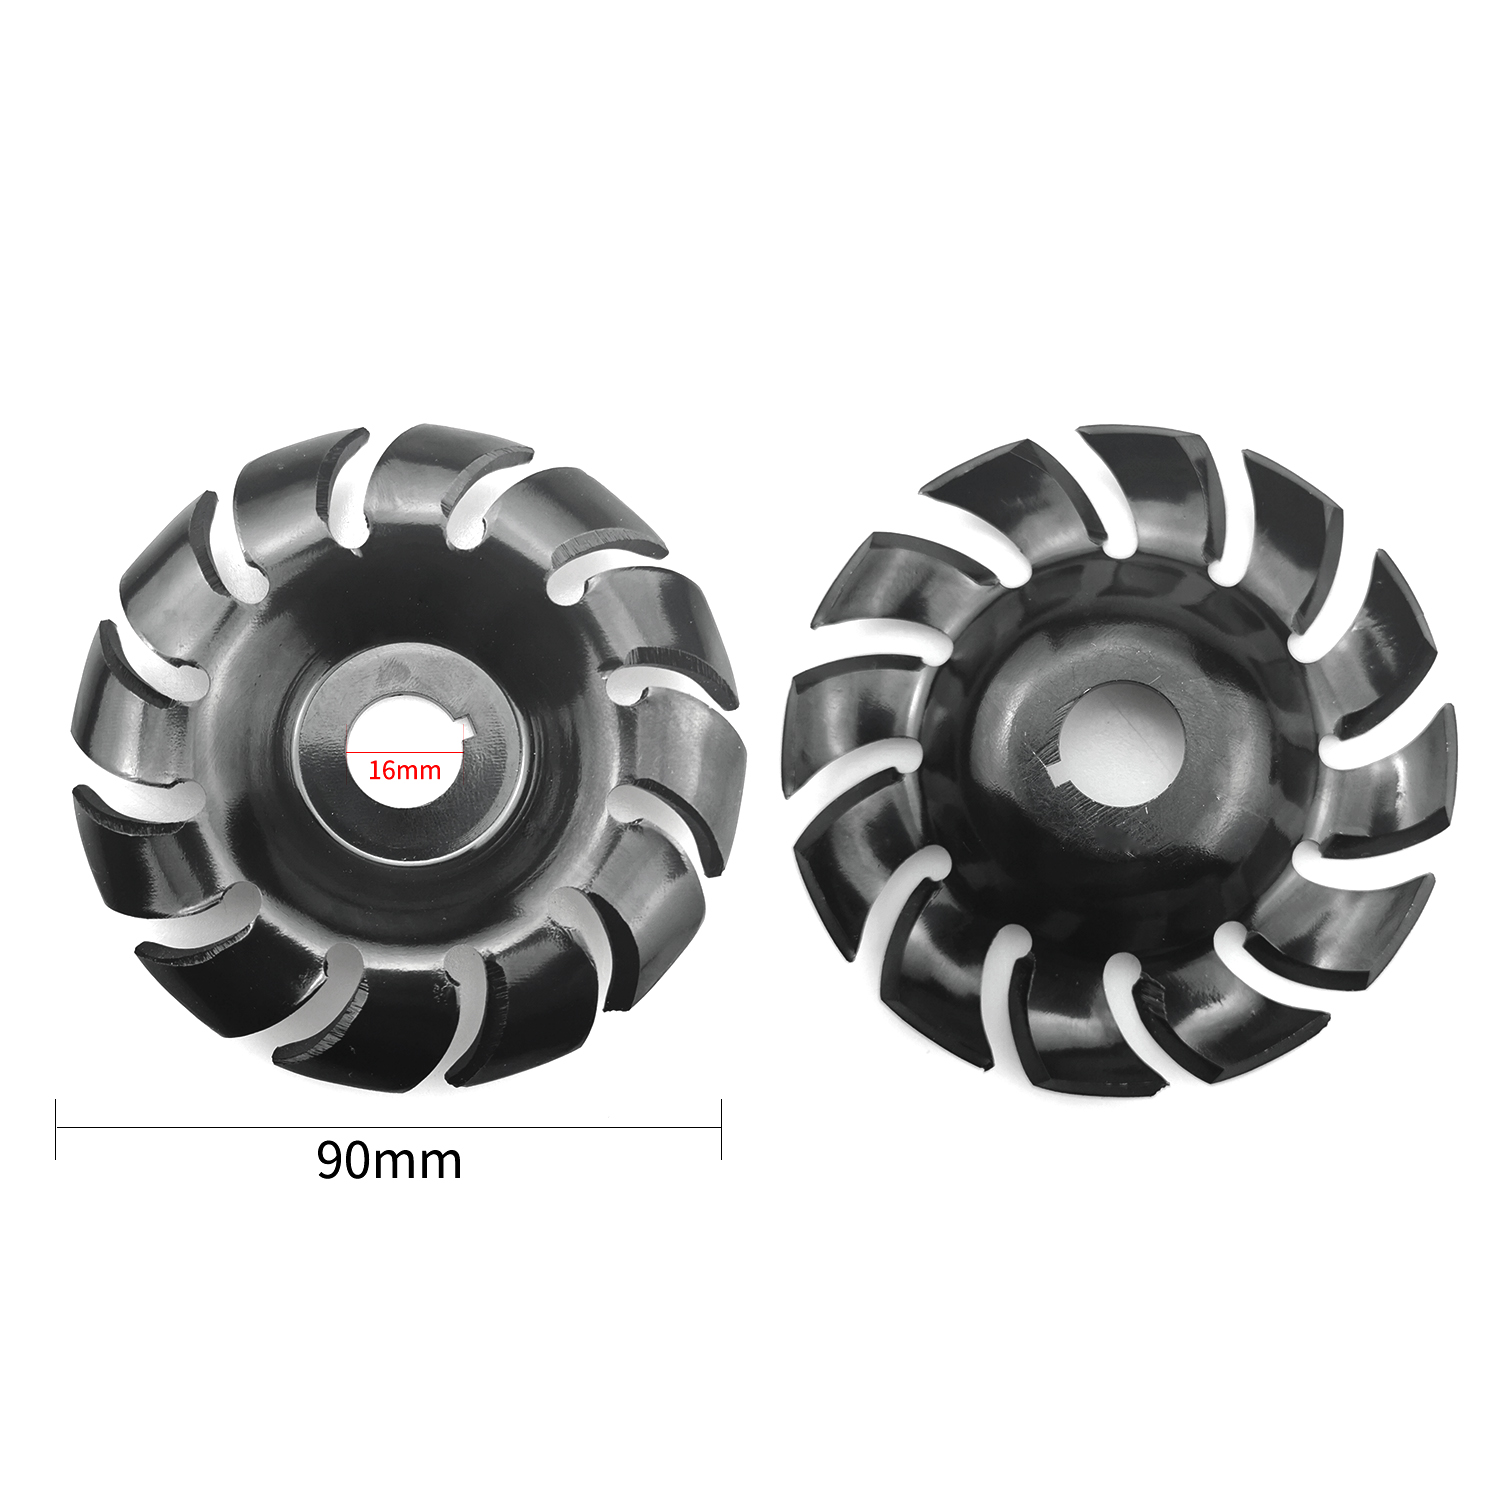 Manganese Steel 90mm 12 Teeth Wood Carving Disc 16mm Bore Grinder Shaping Disc for 100 115 Angle Grinder Woodworking Tools